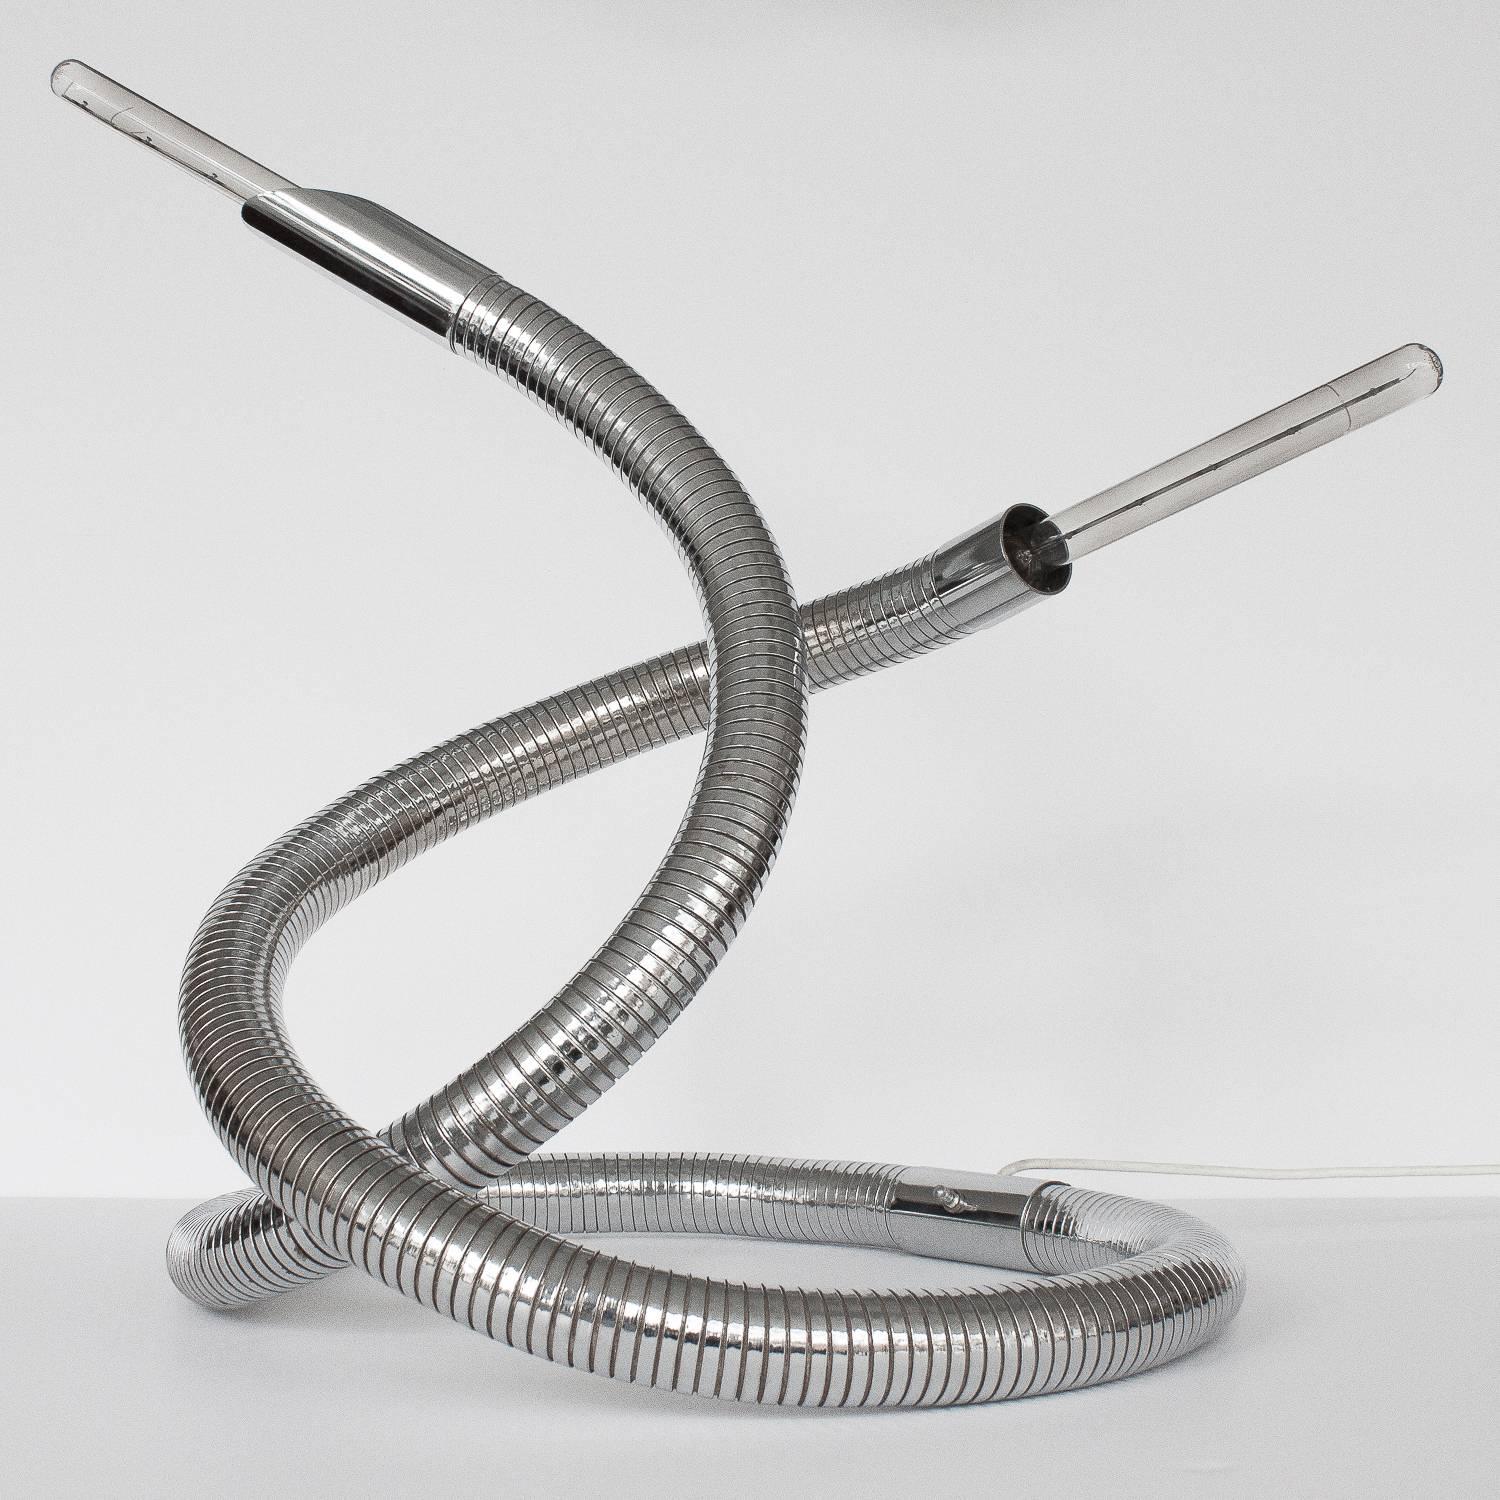 Rare and unusual 1960s Italian chrome flexible snake lamp. A 10 foot long chrome-plated bendable 2